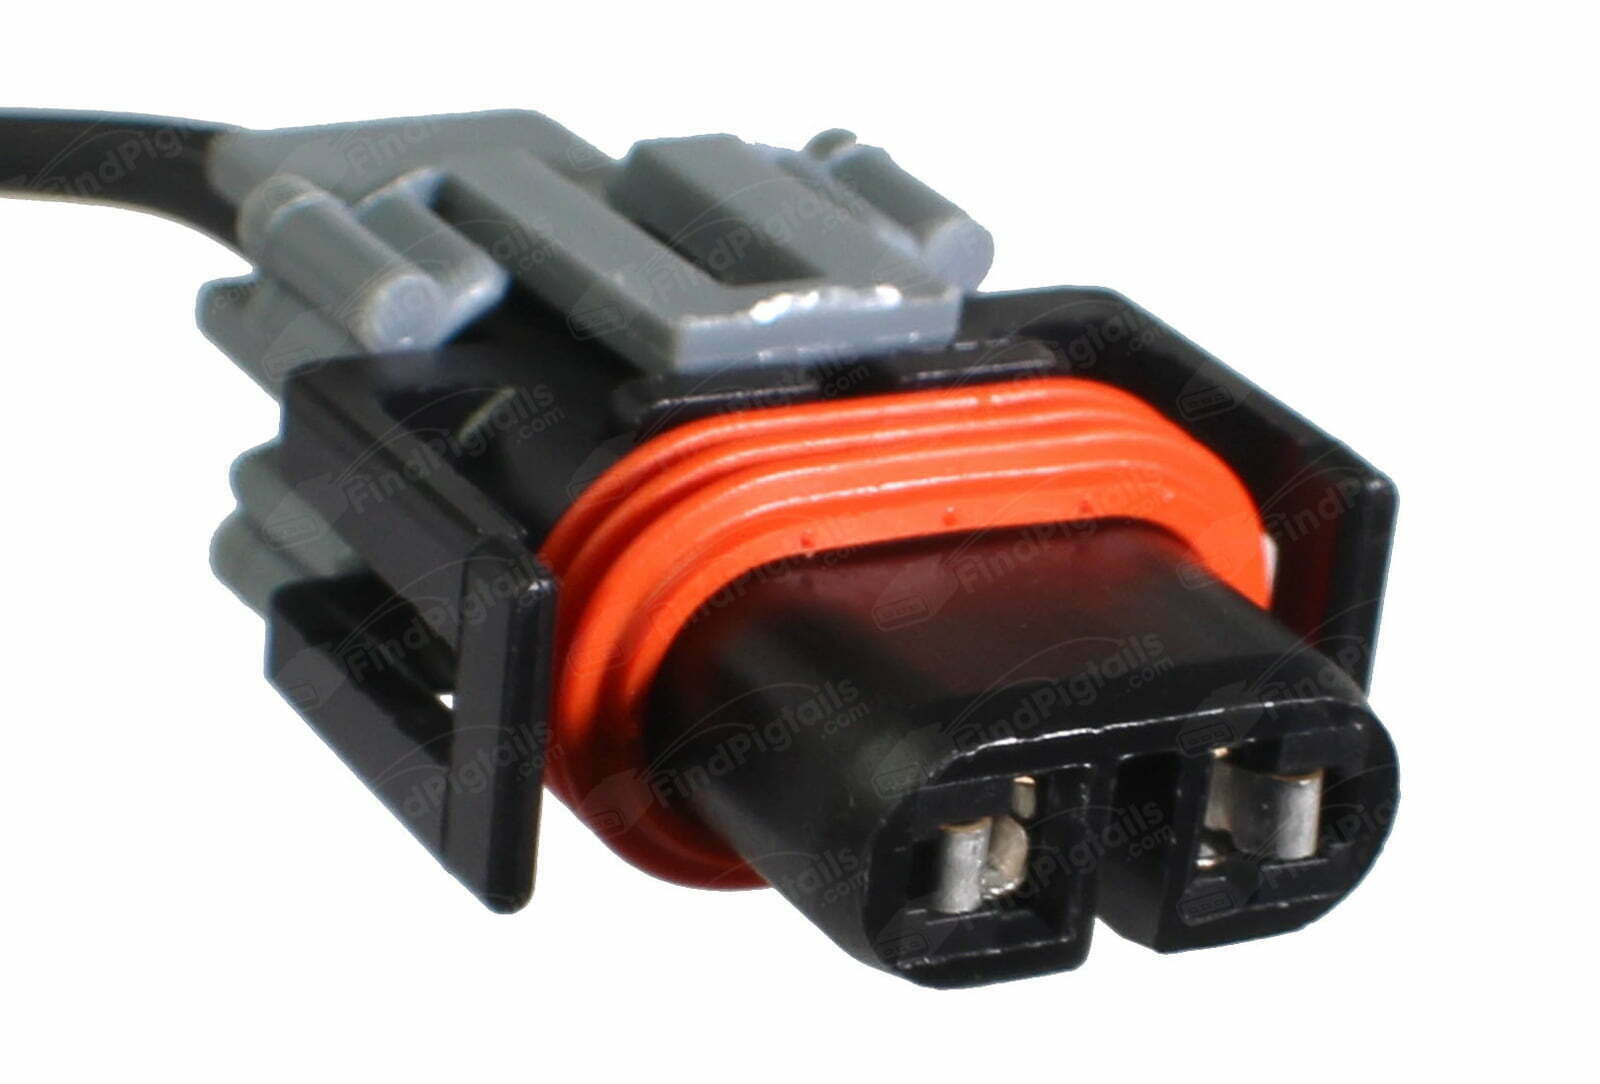 B21B2 is a 2-pin automotive connector which serves at least 542 functions for 147+ vehicles.